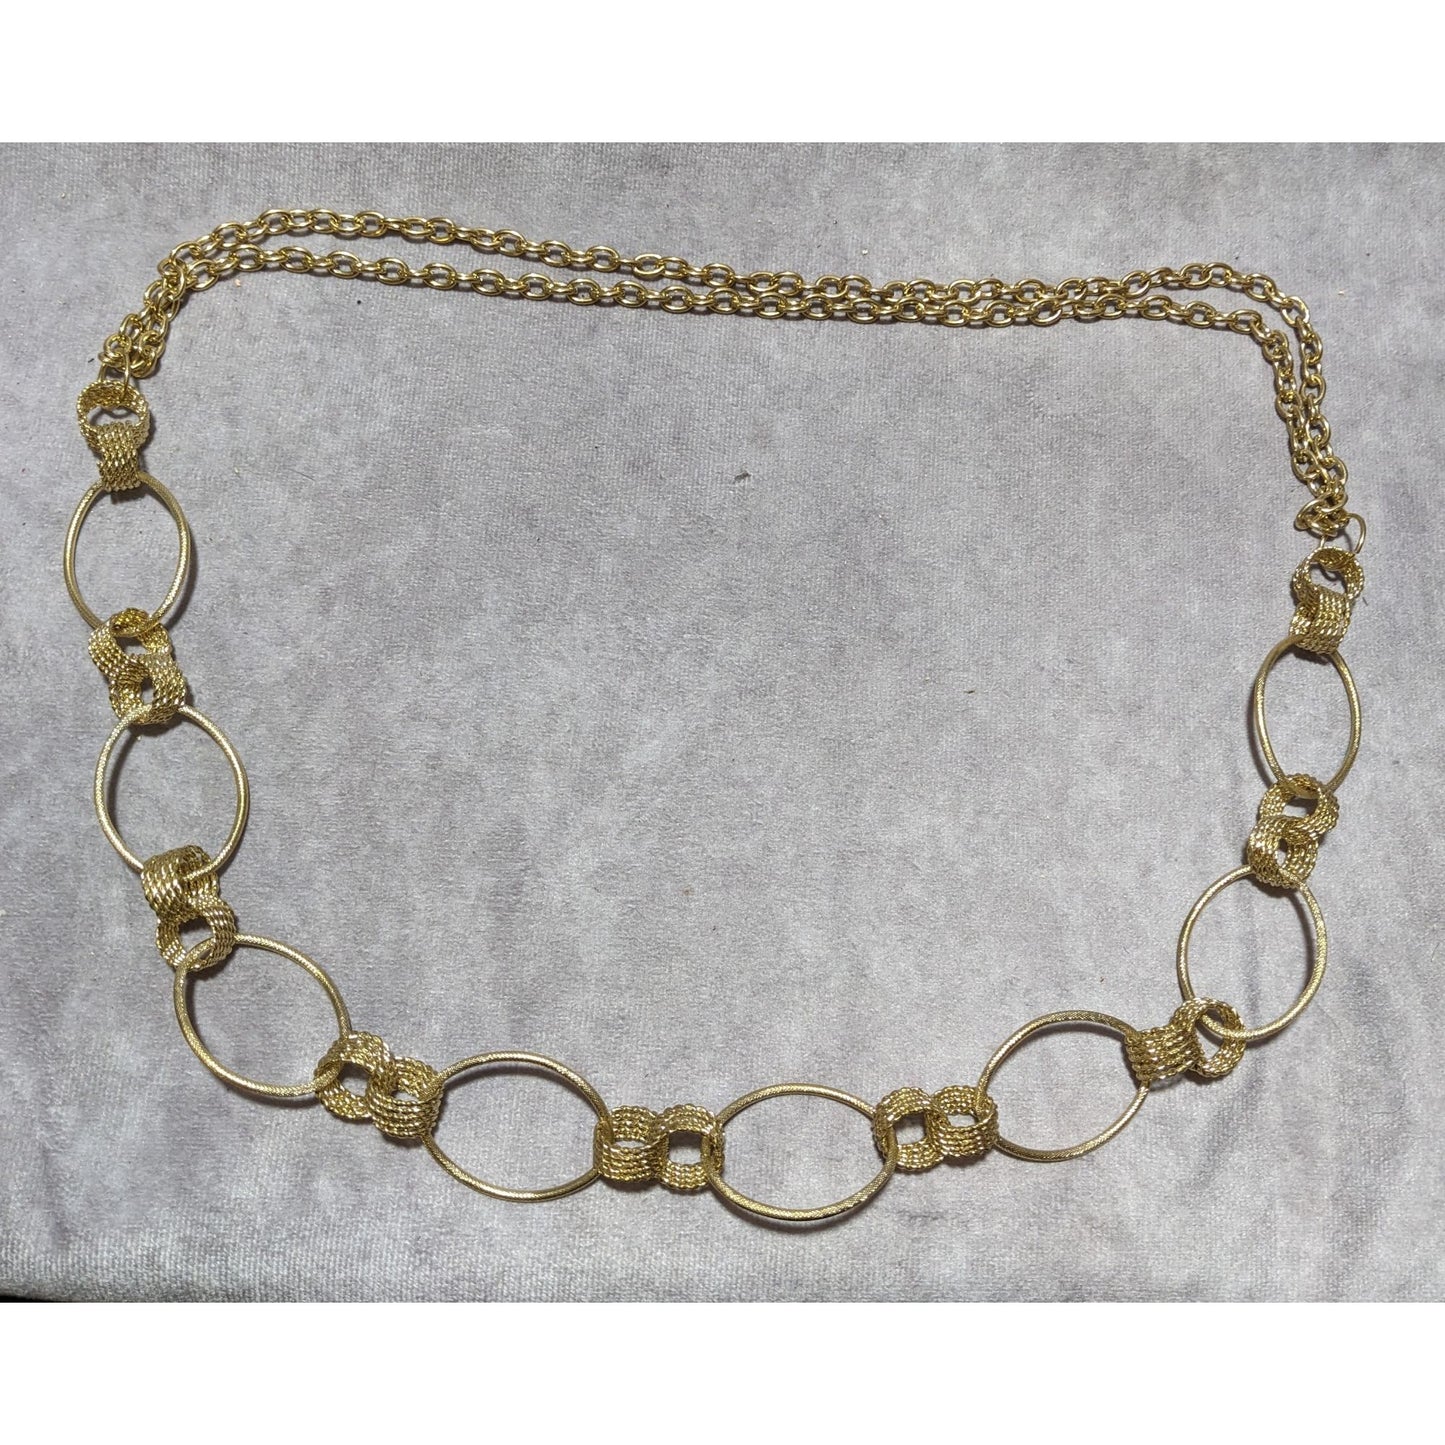 Gold Ring Decorative Chain Link Necklace